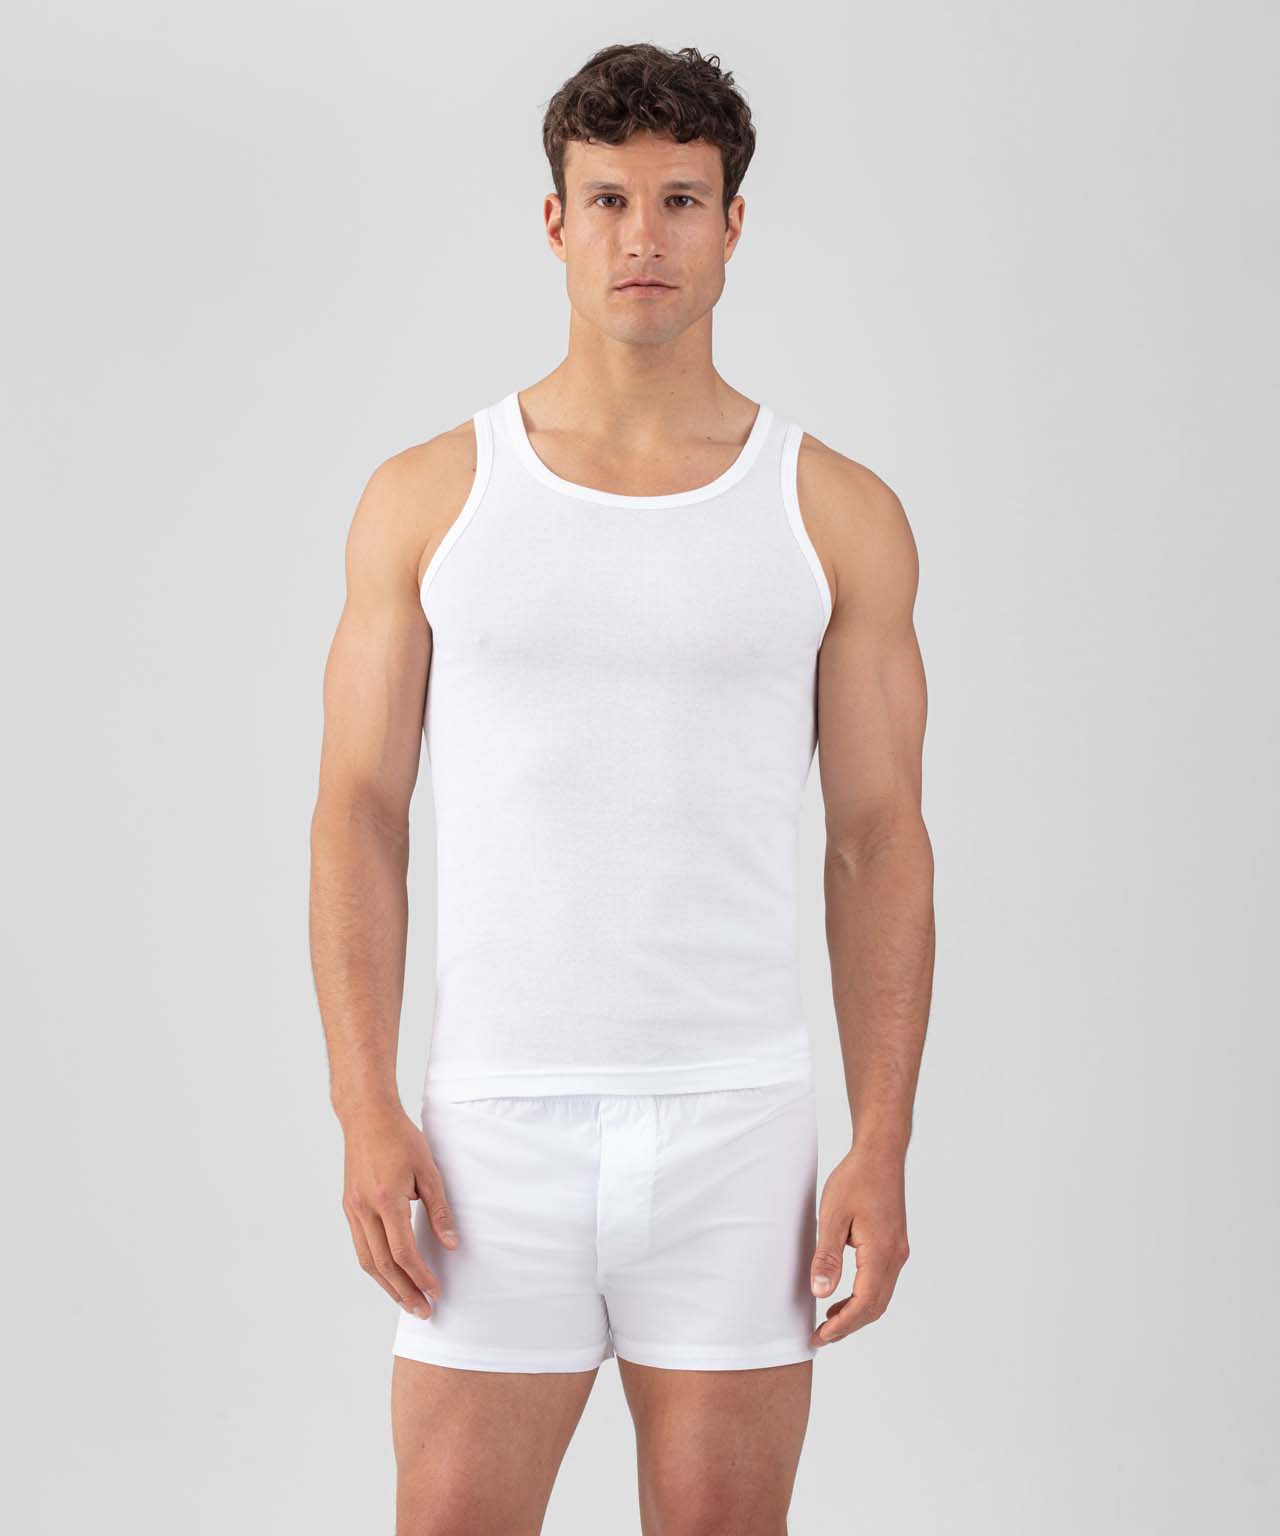 JMR Men Tank Tops 100% Cotton White Sleeveless Undershirts Tagless Ribbed  Slim Fit Muscle Tank Top with Scoop Neckline